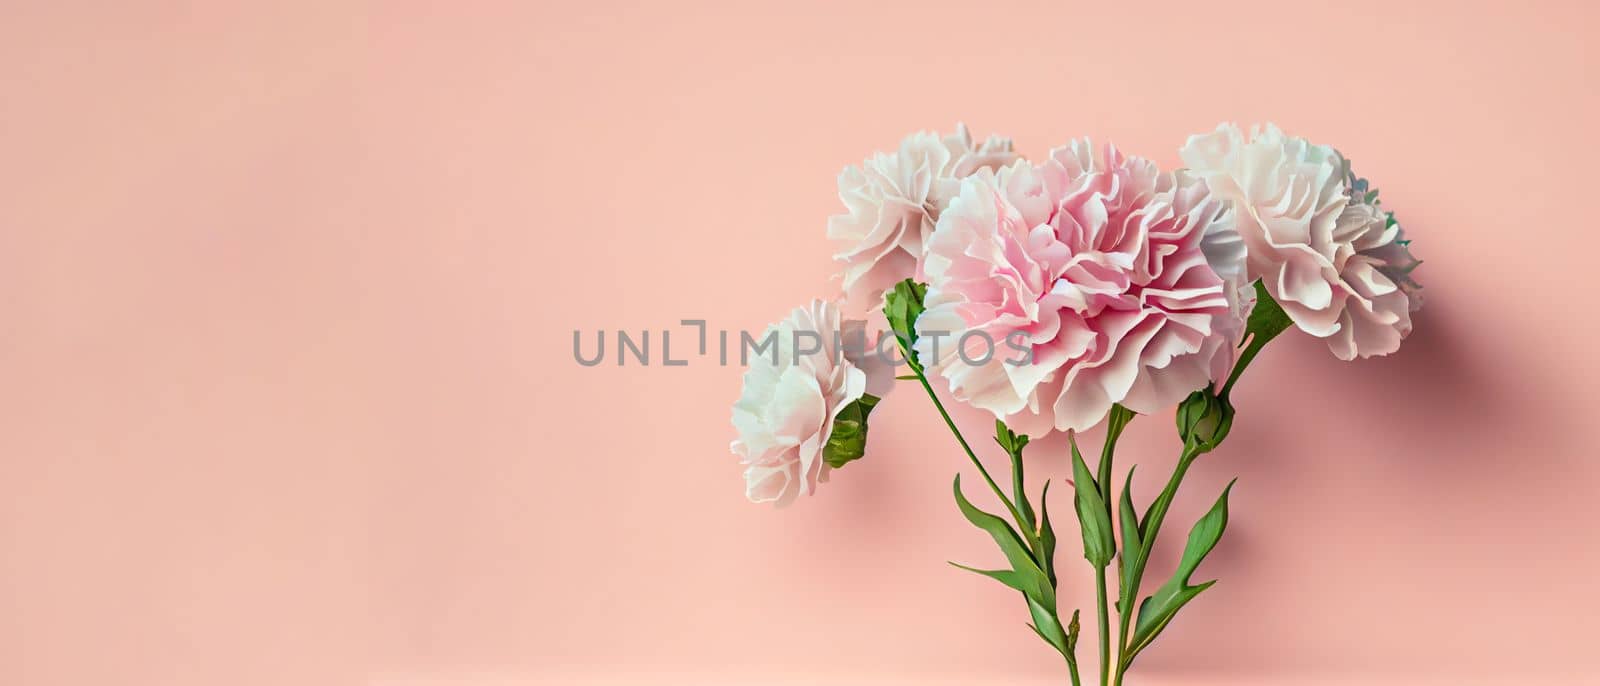 Carnation bouquet on pastel pink background with copy space. 3D illustration concept for Mother's Day holiday greetings card. Wide angle format banner